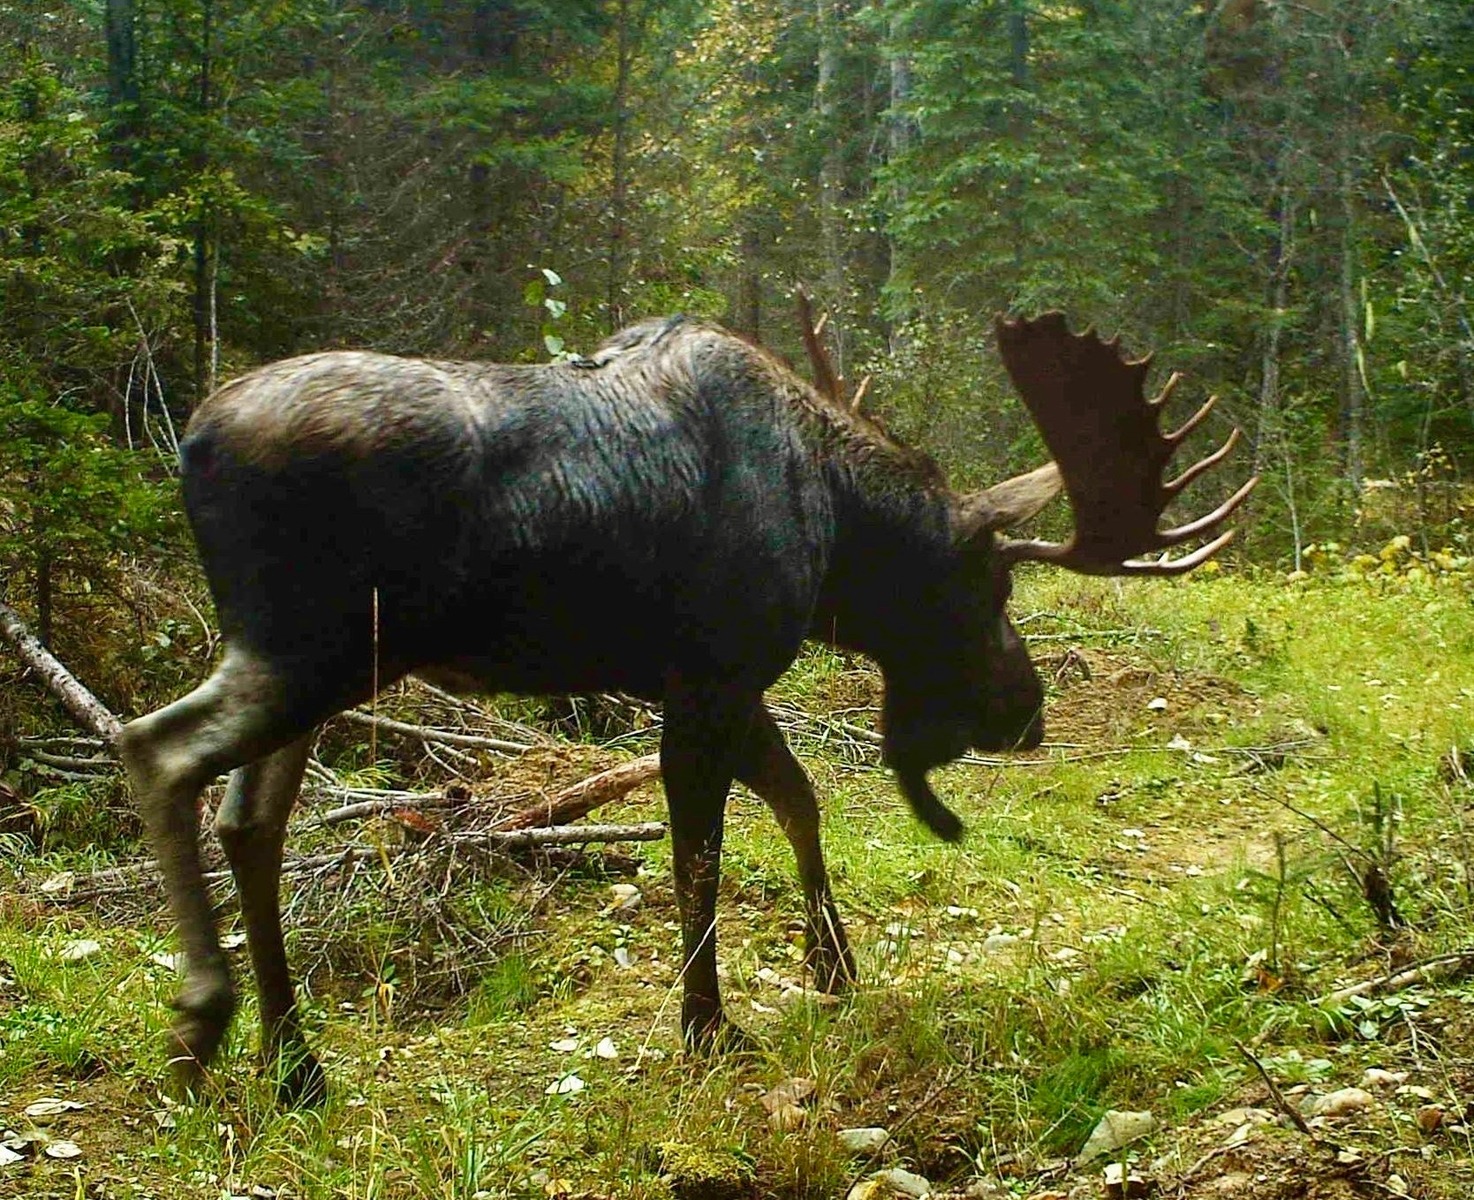 Moose traditionally have thrived in the cold wet understories of the Kootenai National Forest in the Yaak Valley. However, they are suffering declines in the US, throughout many of their last hauntsin northern tiers of the Lower 48 states.Afflicting them are habitat loss owed to climate change and development, outbreaks of diseases such as brain worm and infestations of winter ticks. Yes, wolves can have an additive influence on mortality but it secondary to other factors. Photo courtesy Yaak Valley Forest Council